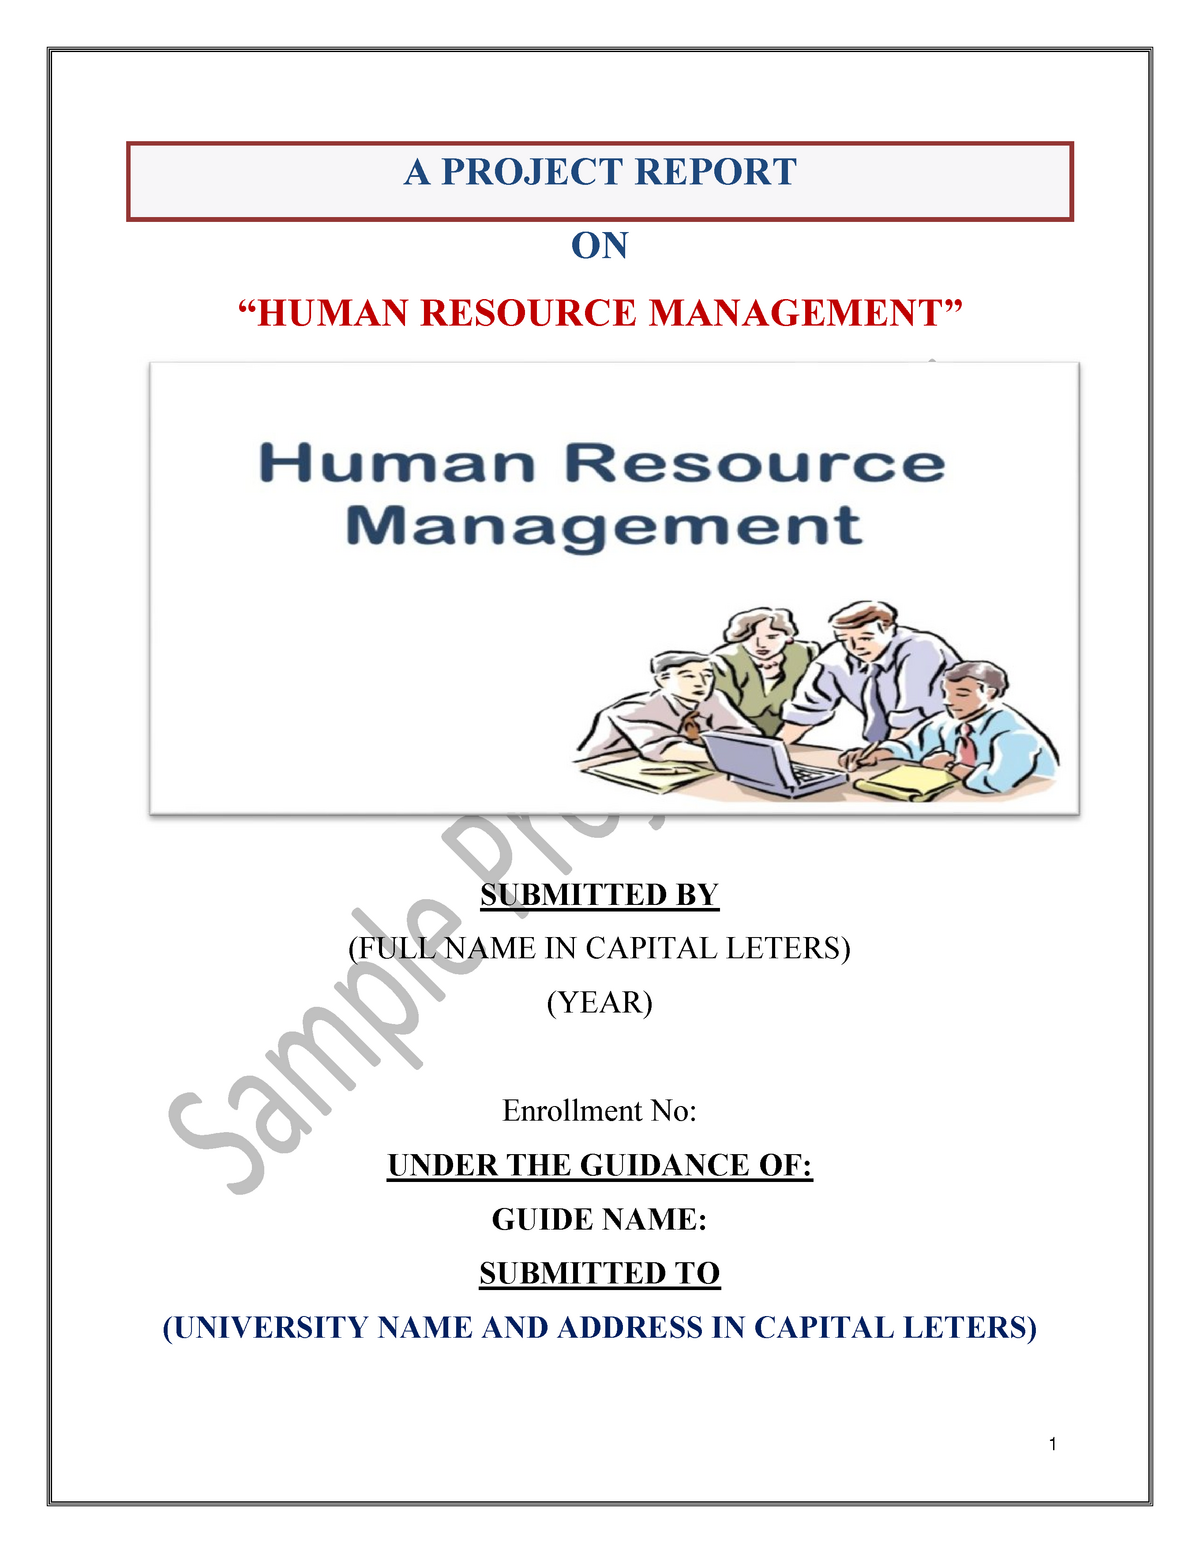 research paper topics related to human resource management